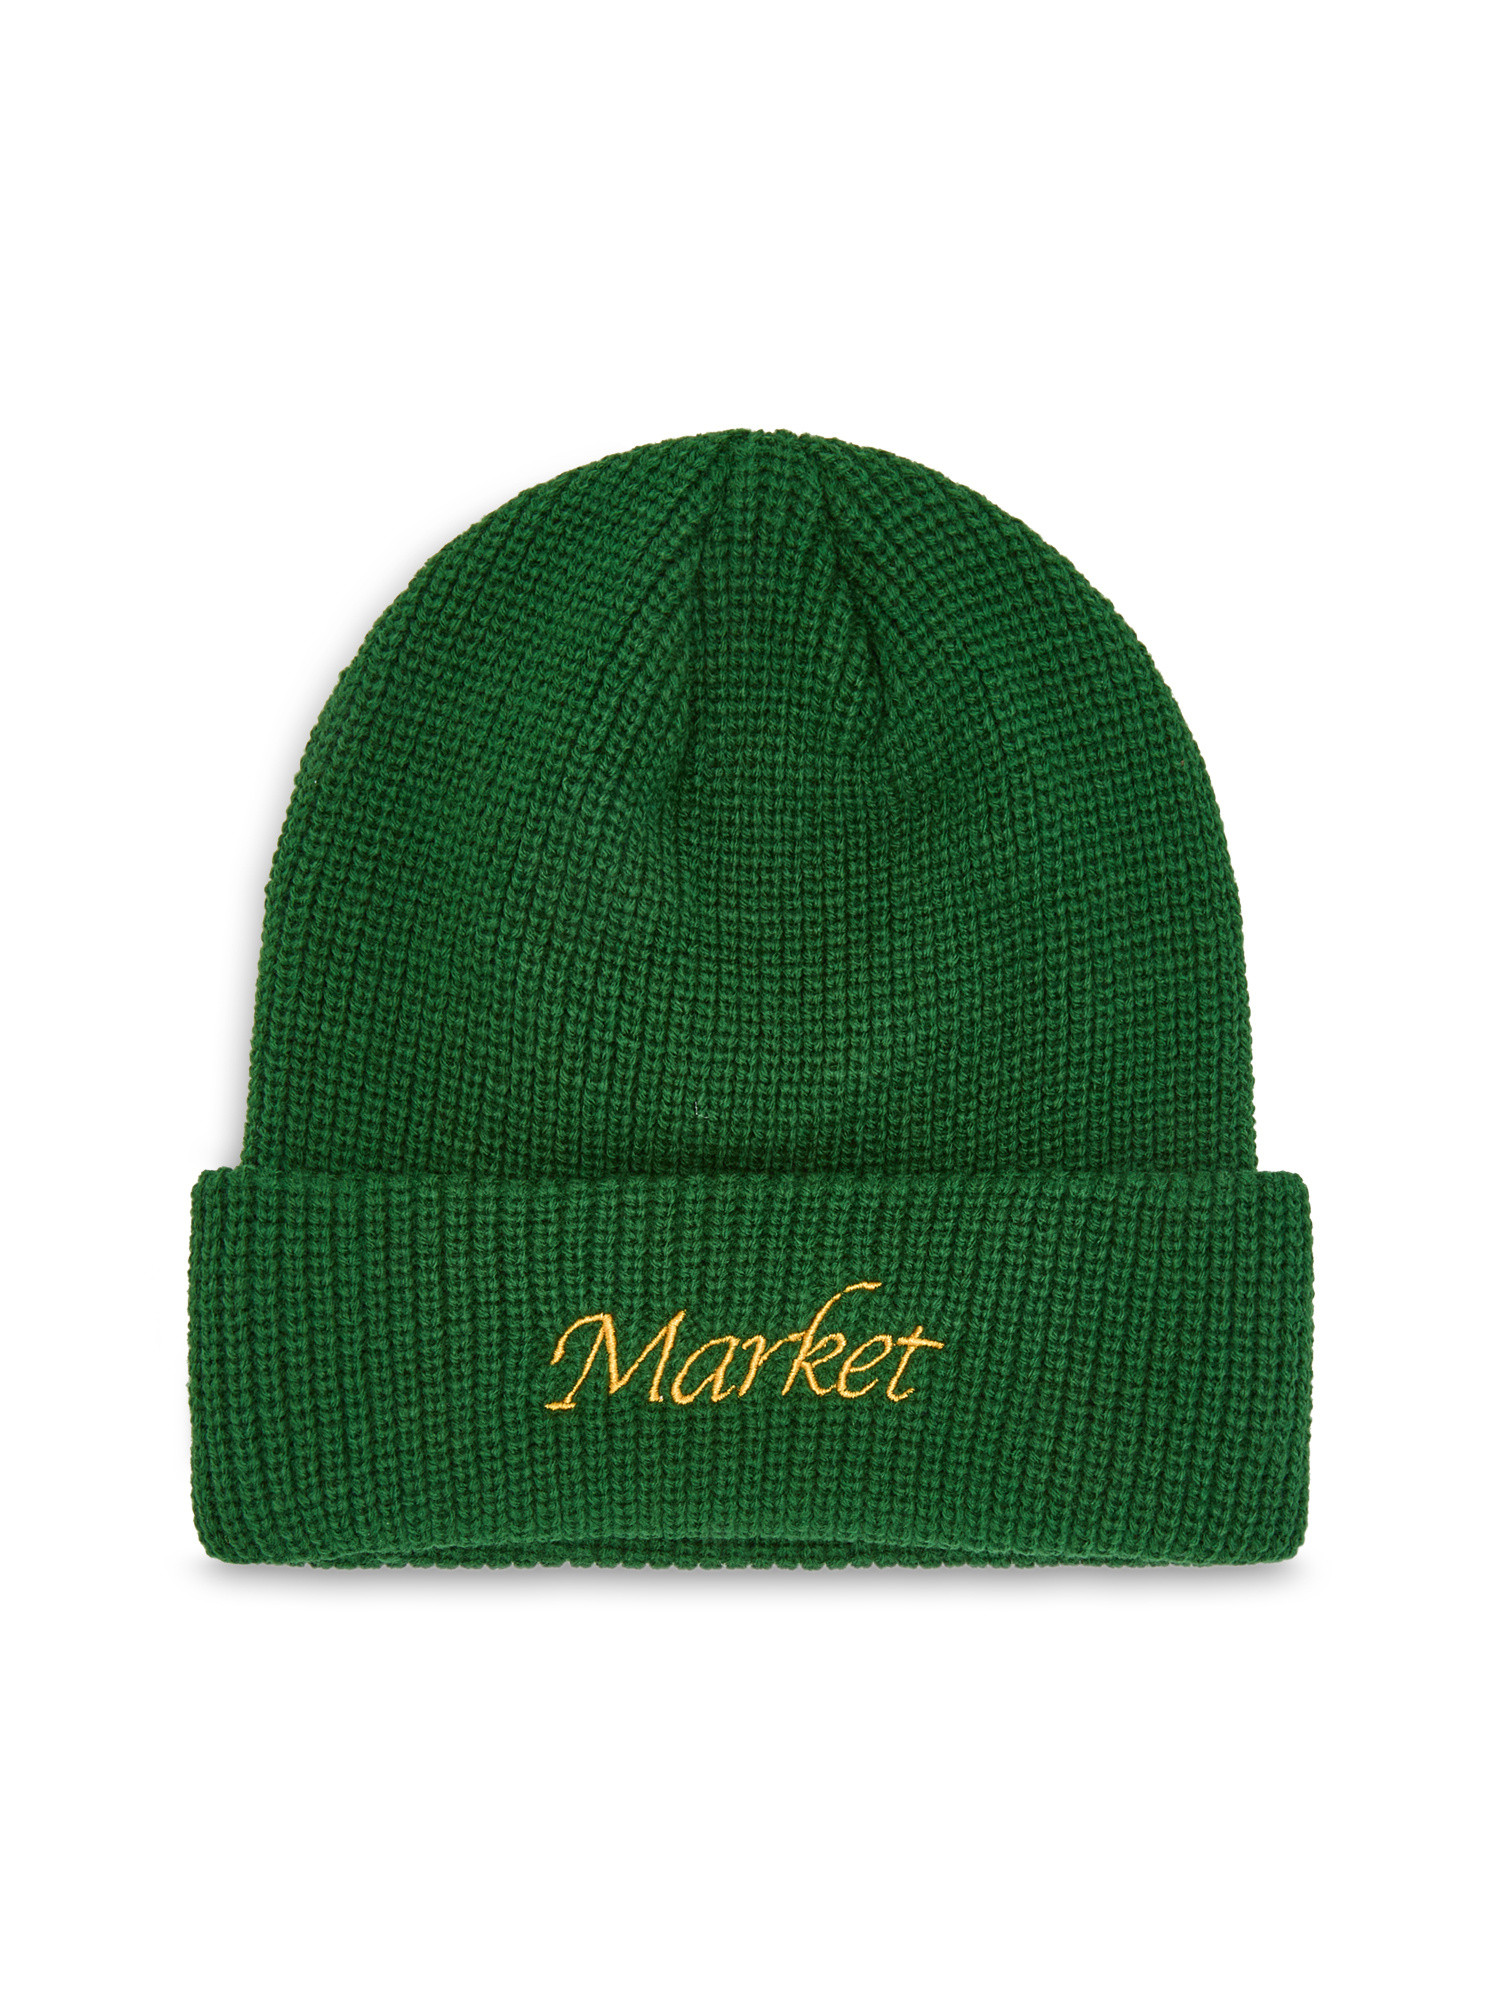 Market - Smiley® upside down beanie, Green, large image number 0